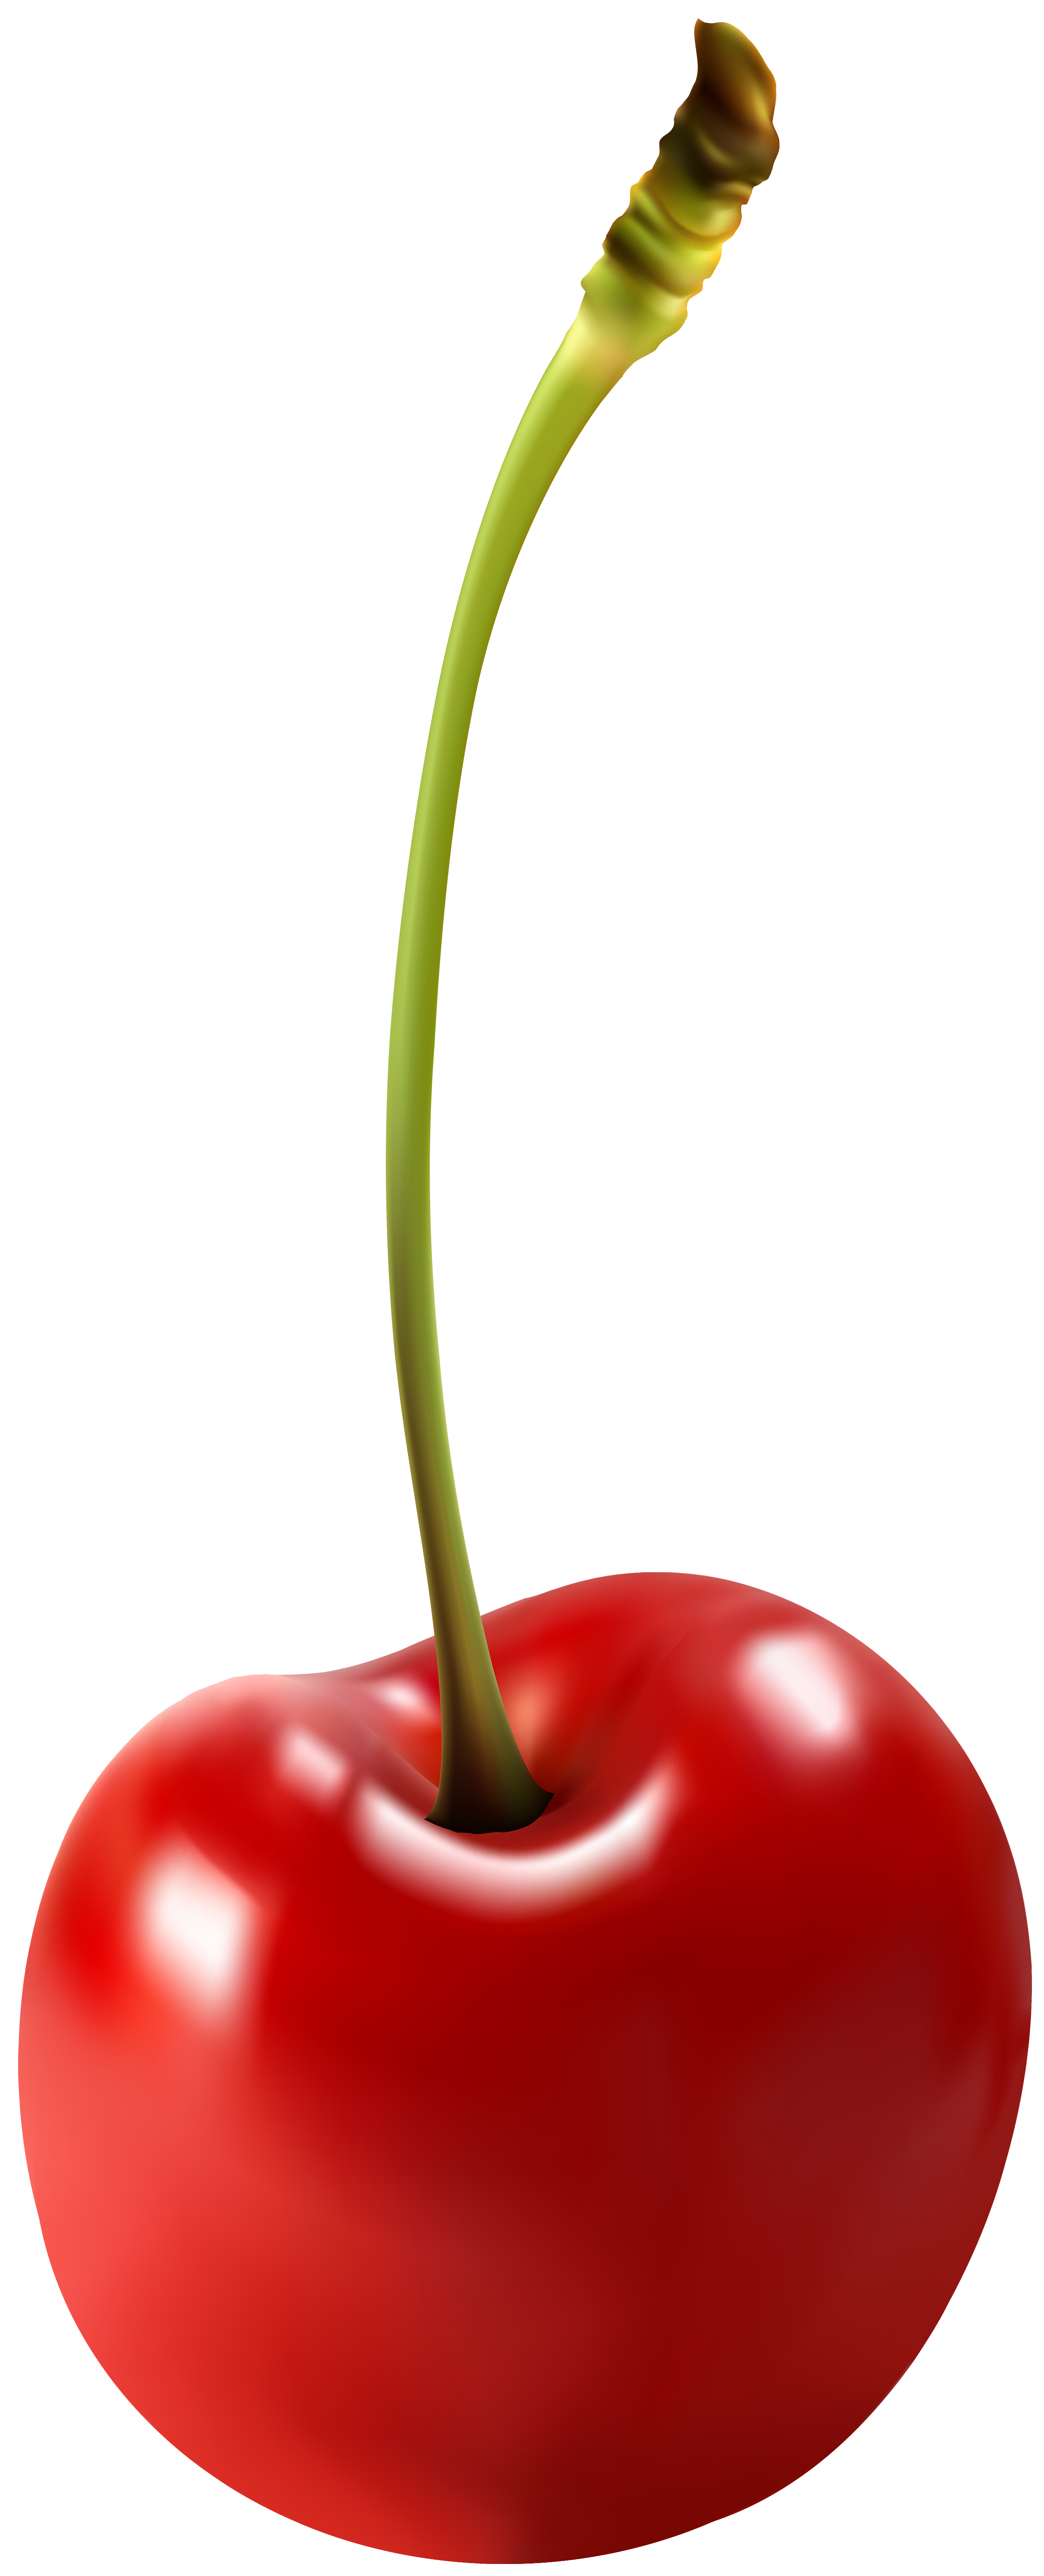 Cherry PNG - 26344